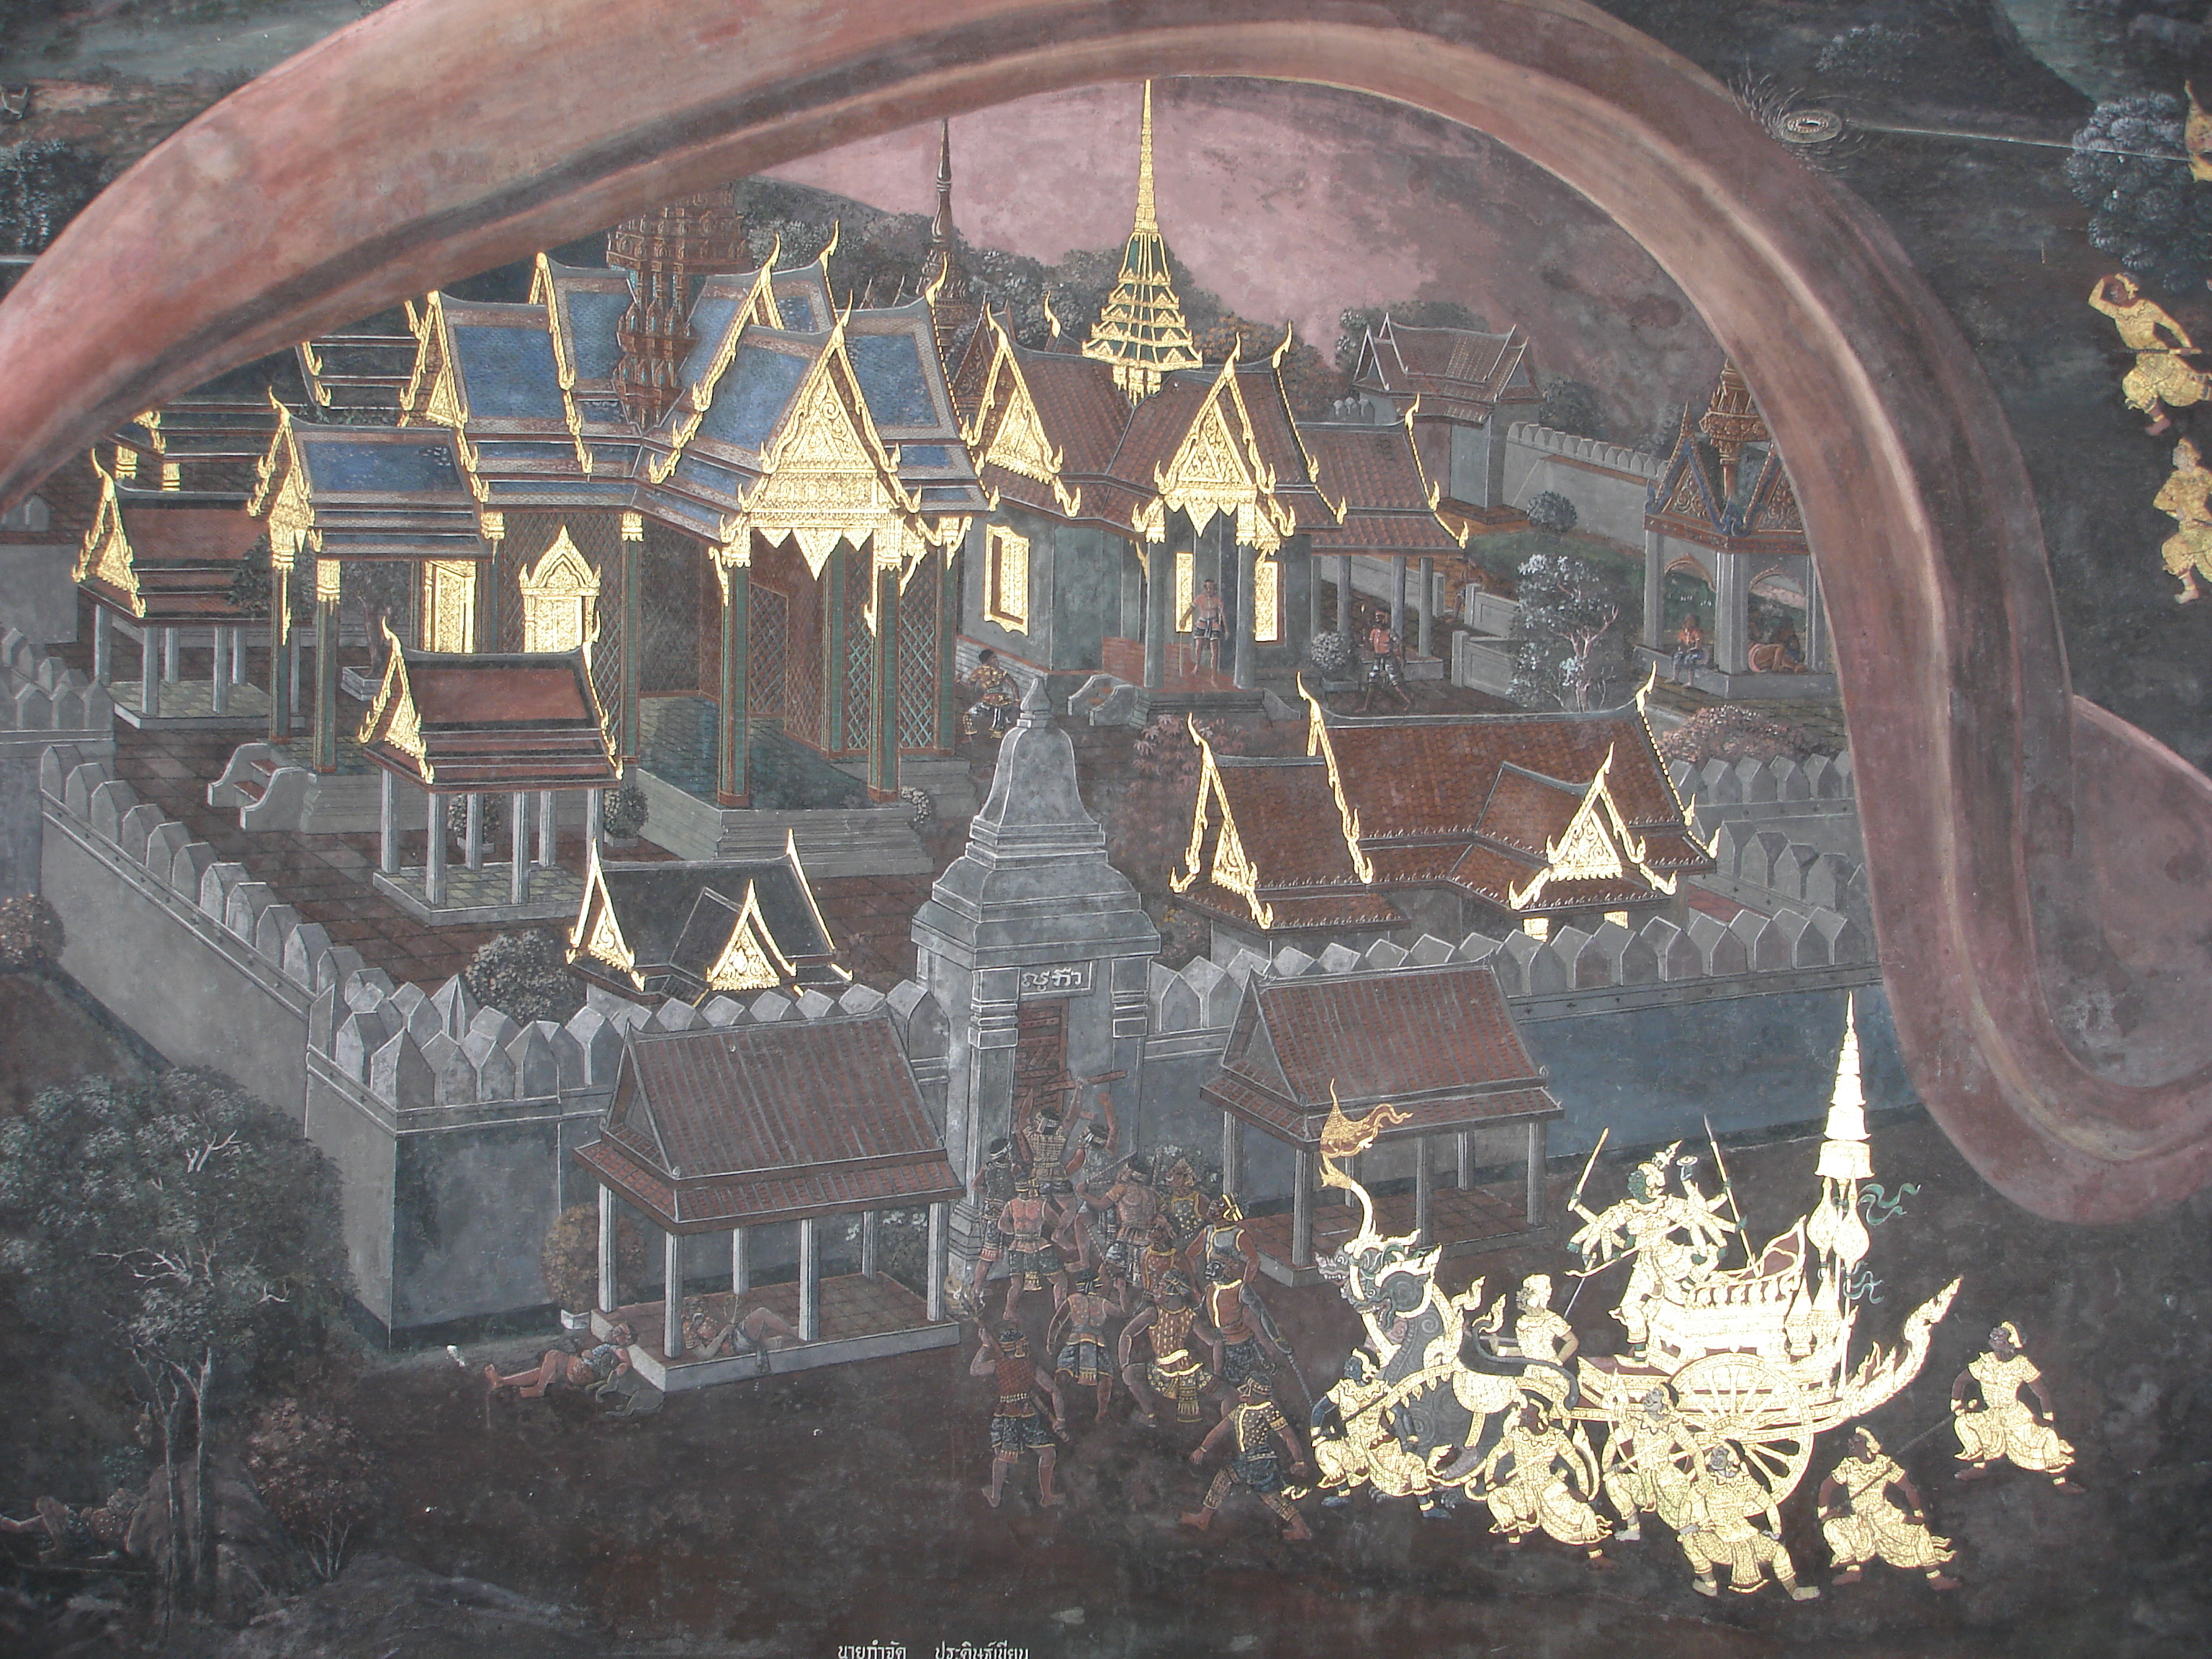 The Grand Palace in Bangkok contains numerous beautiful murals. Photos taken by Mark Jochim on May 17, 2006.